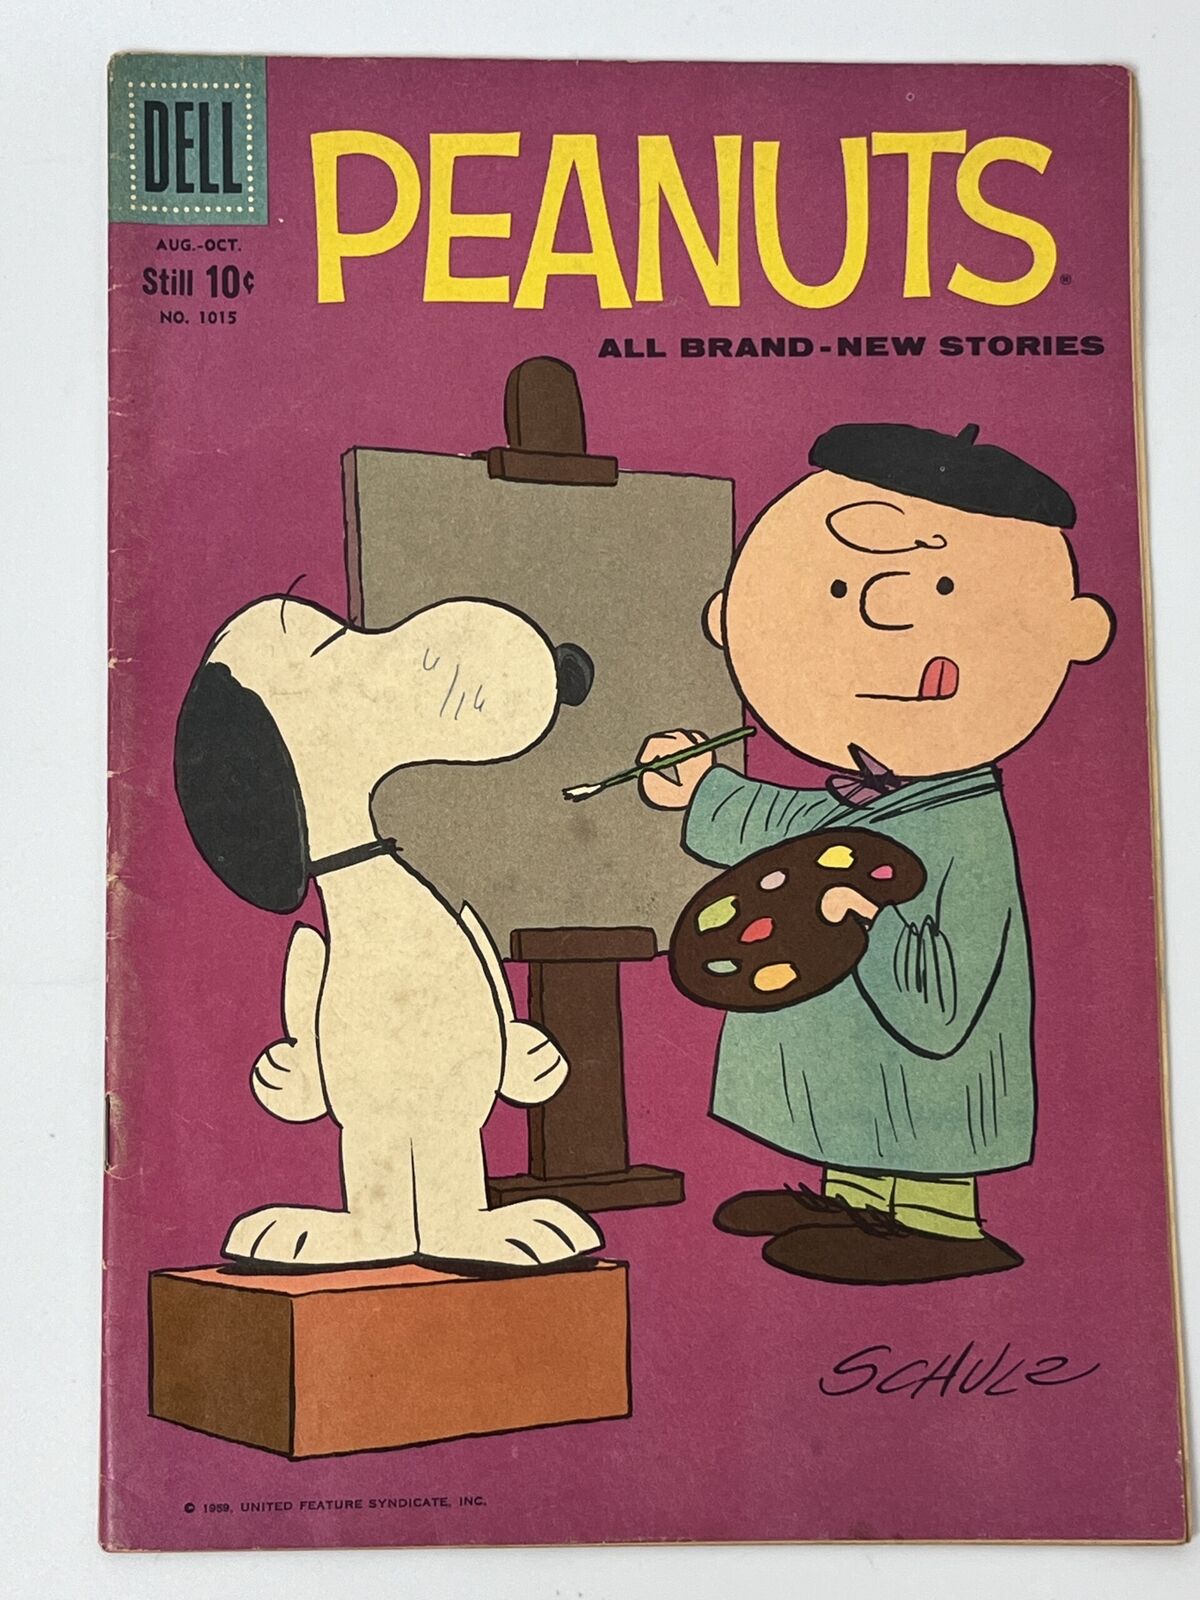 Peanuts #3 (1959) in 4.5 Very Good+